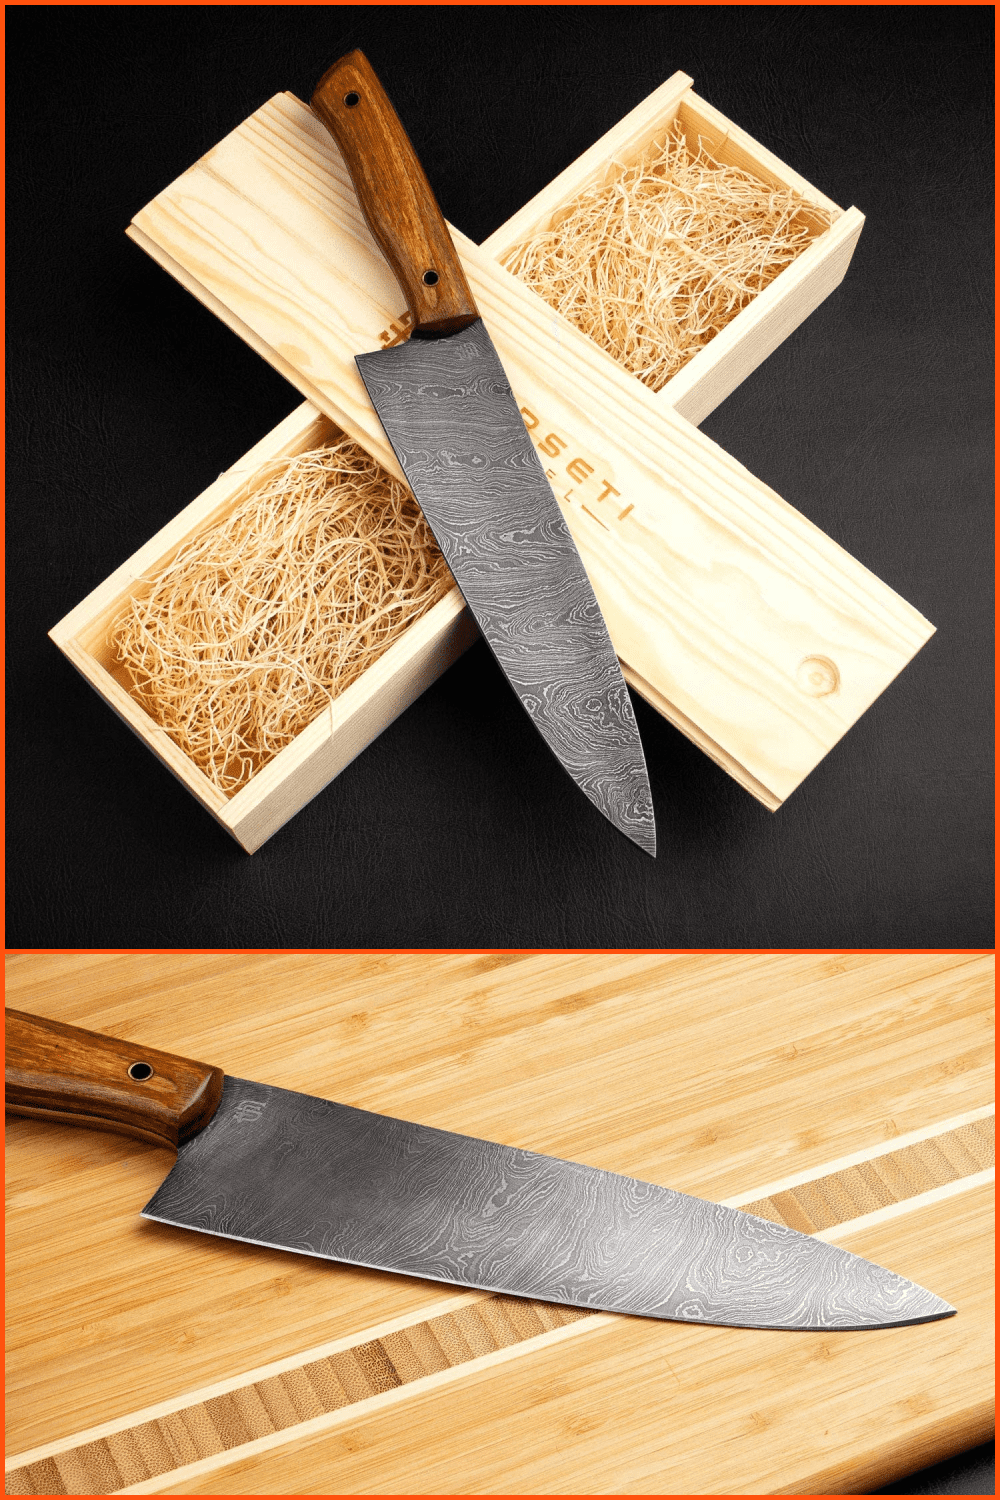 Steel Chef Knife with Rosewood Handle.